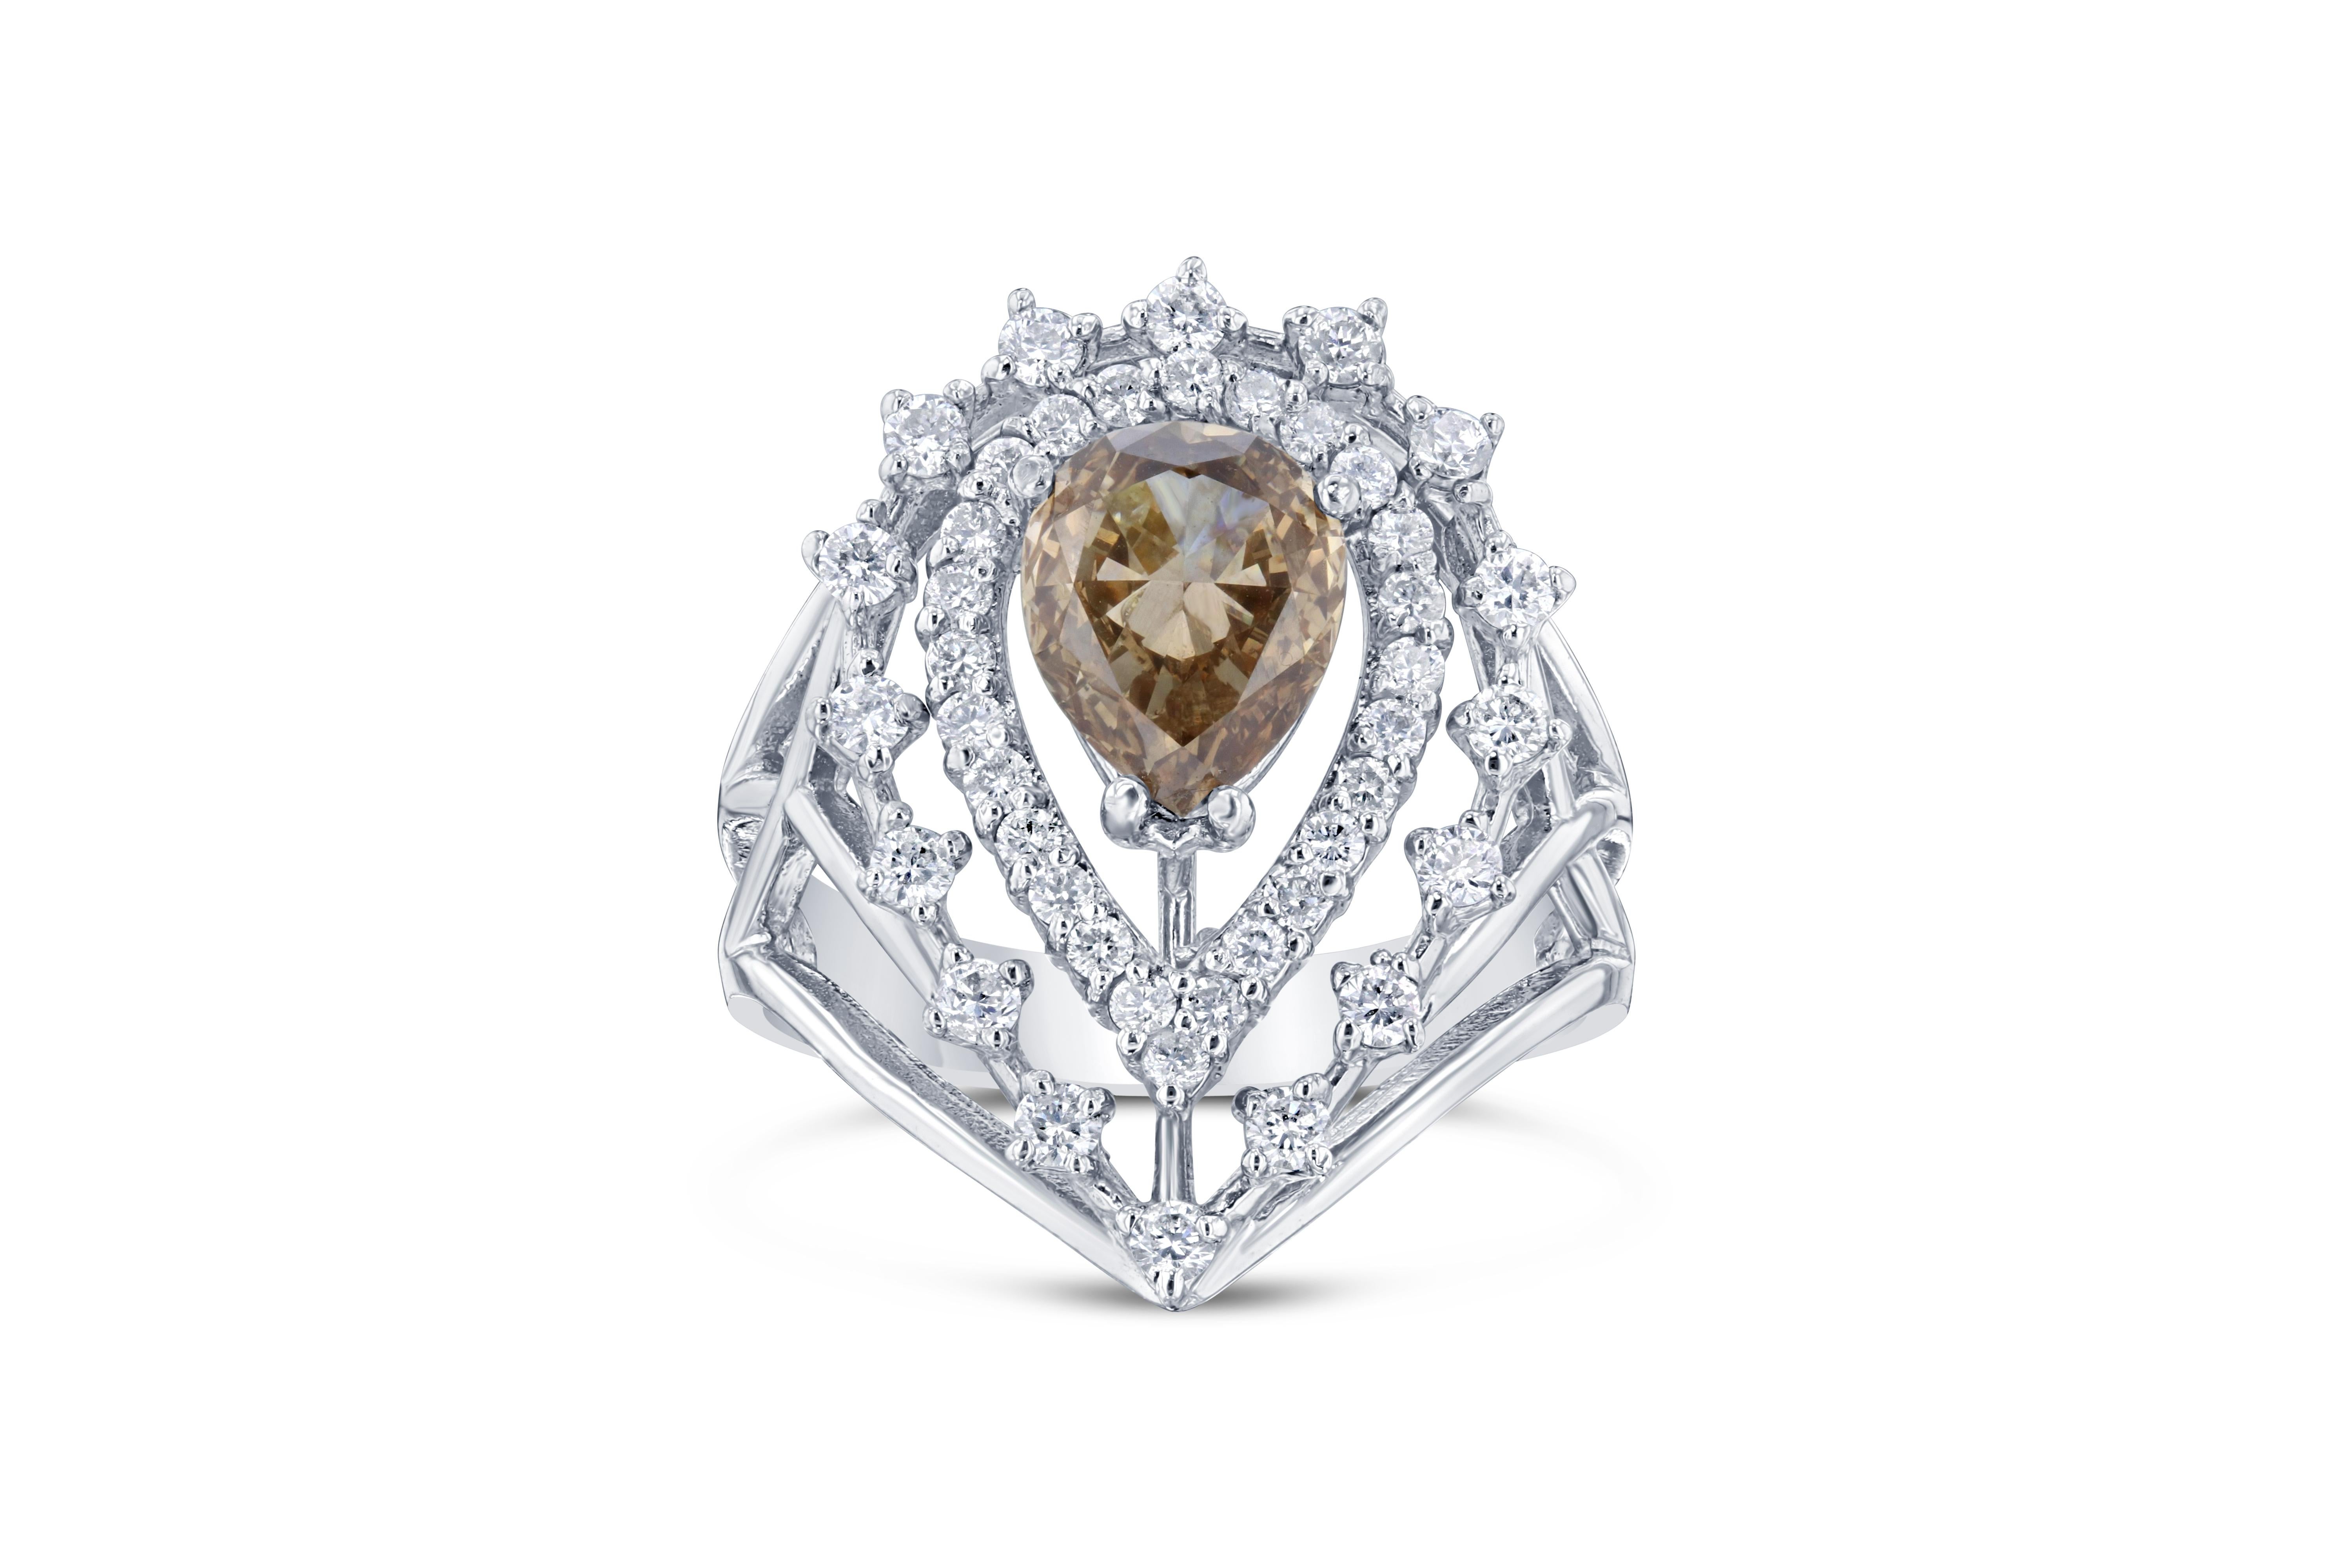 This cocktail ring has a beautiful Brown Pear Cut Natural Diamond weighing 1.62 Carats and is surrounded by 42 Round Cut Diamonds that weigh 0.71 Carats. (SI/F)

It is beautifully set in a Victorian-Inspired 18 Karat White Gold setting and weighs